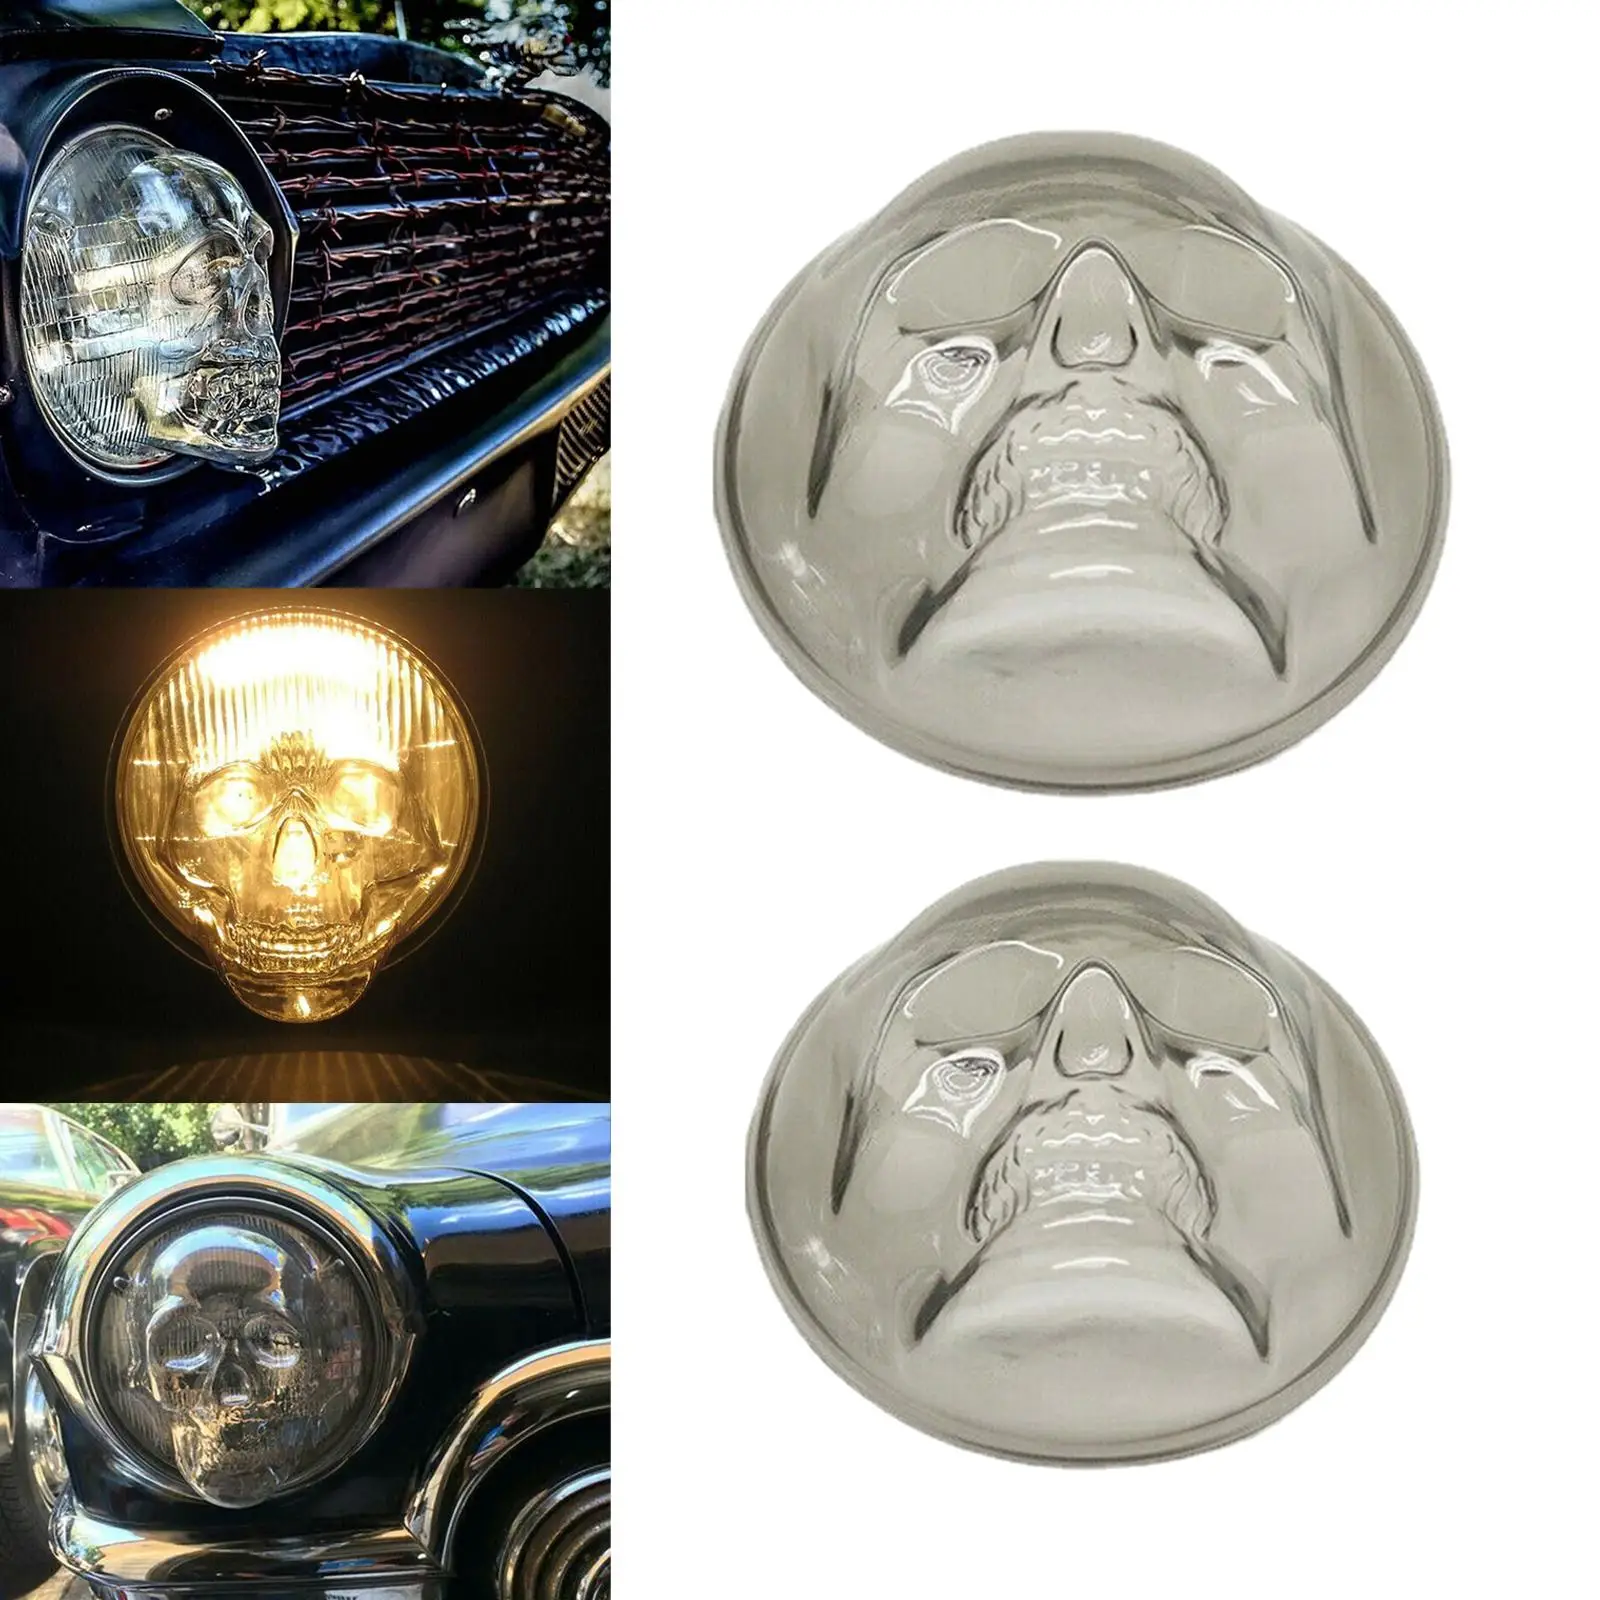 Skull Headlight Covers PC Resin Material Easy to Install Mounting Decorative Lamp Covers Replacement Parts for Car Truck